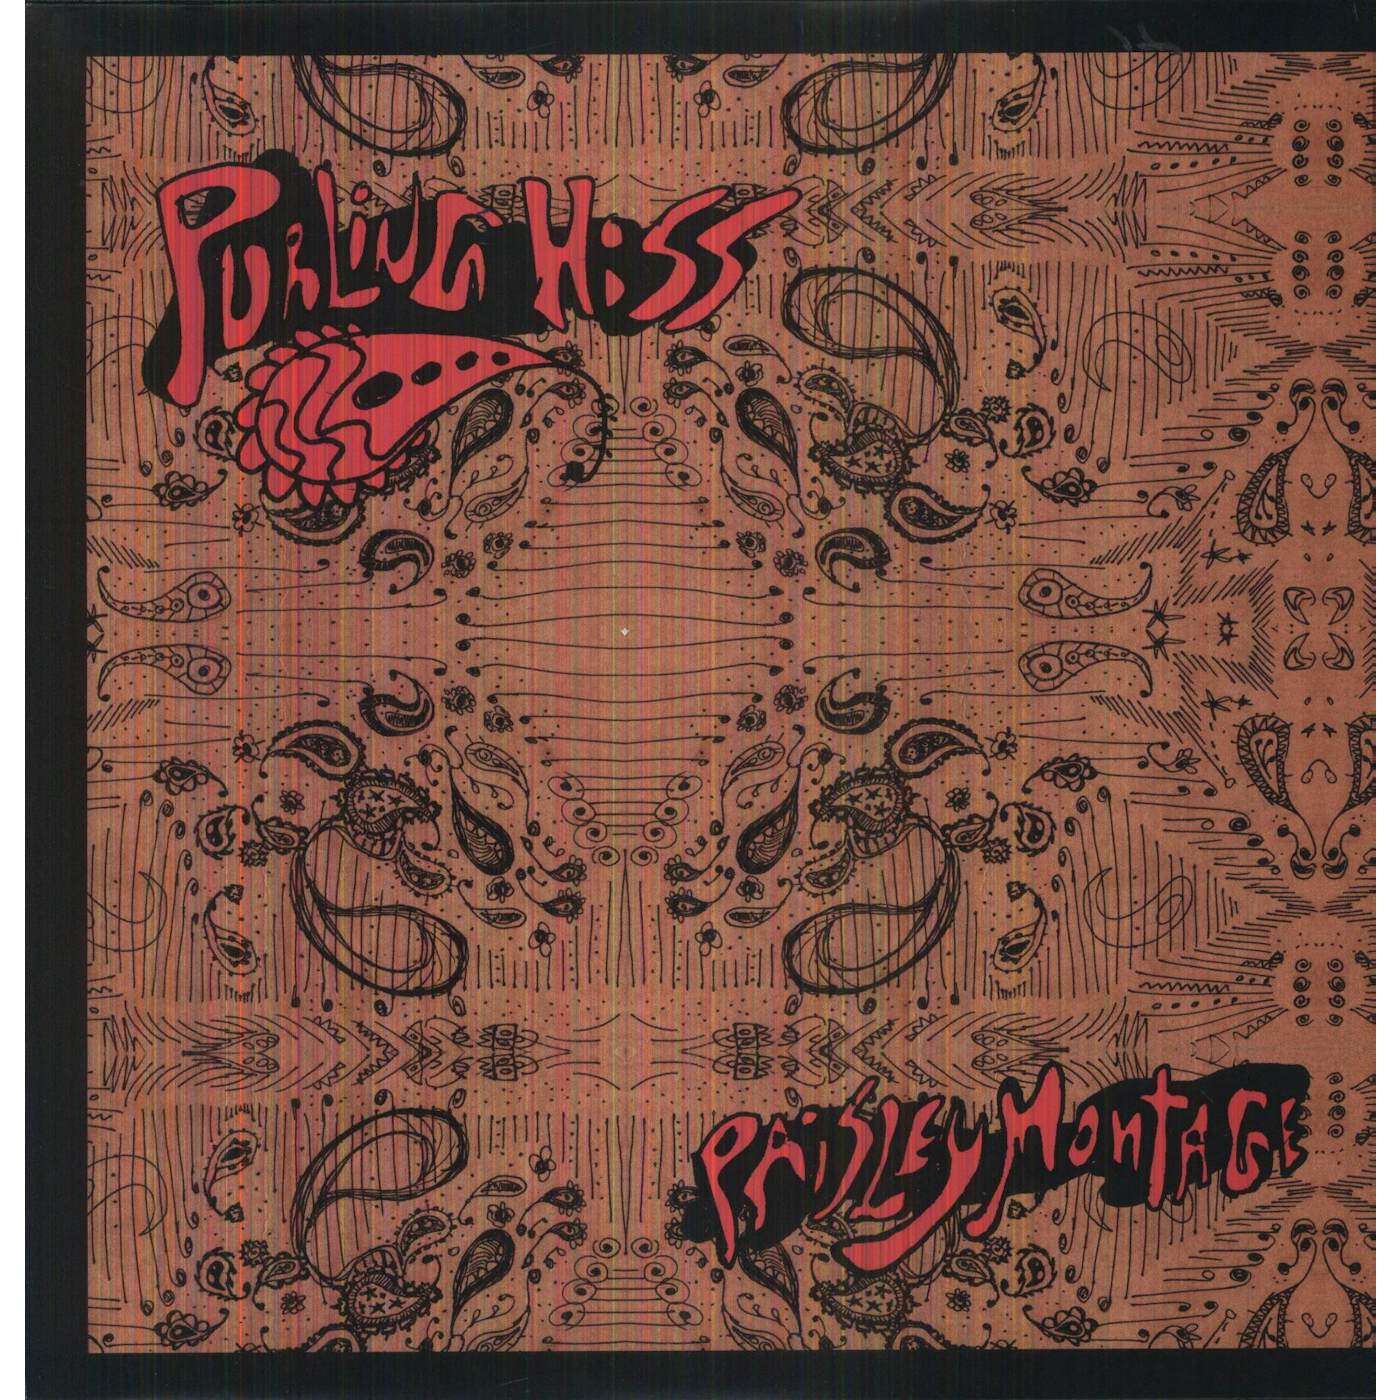 Purling Hiss Paisley Montage Vinyl Record